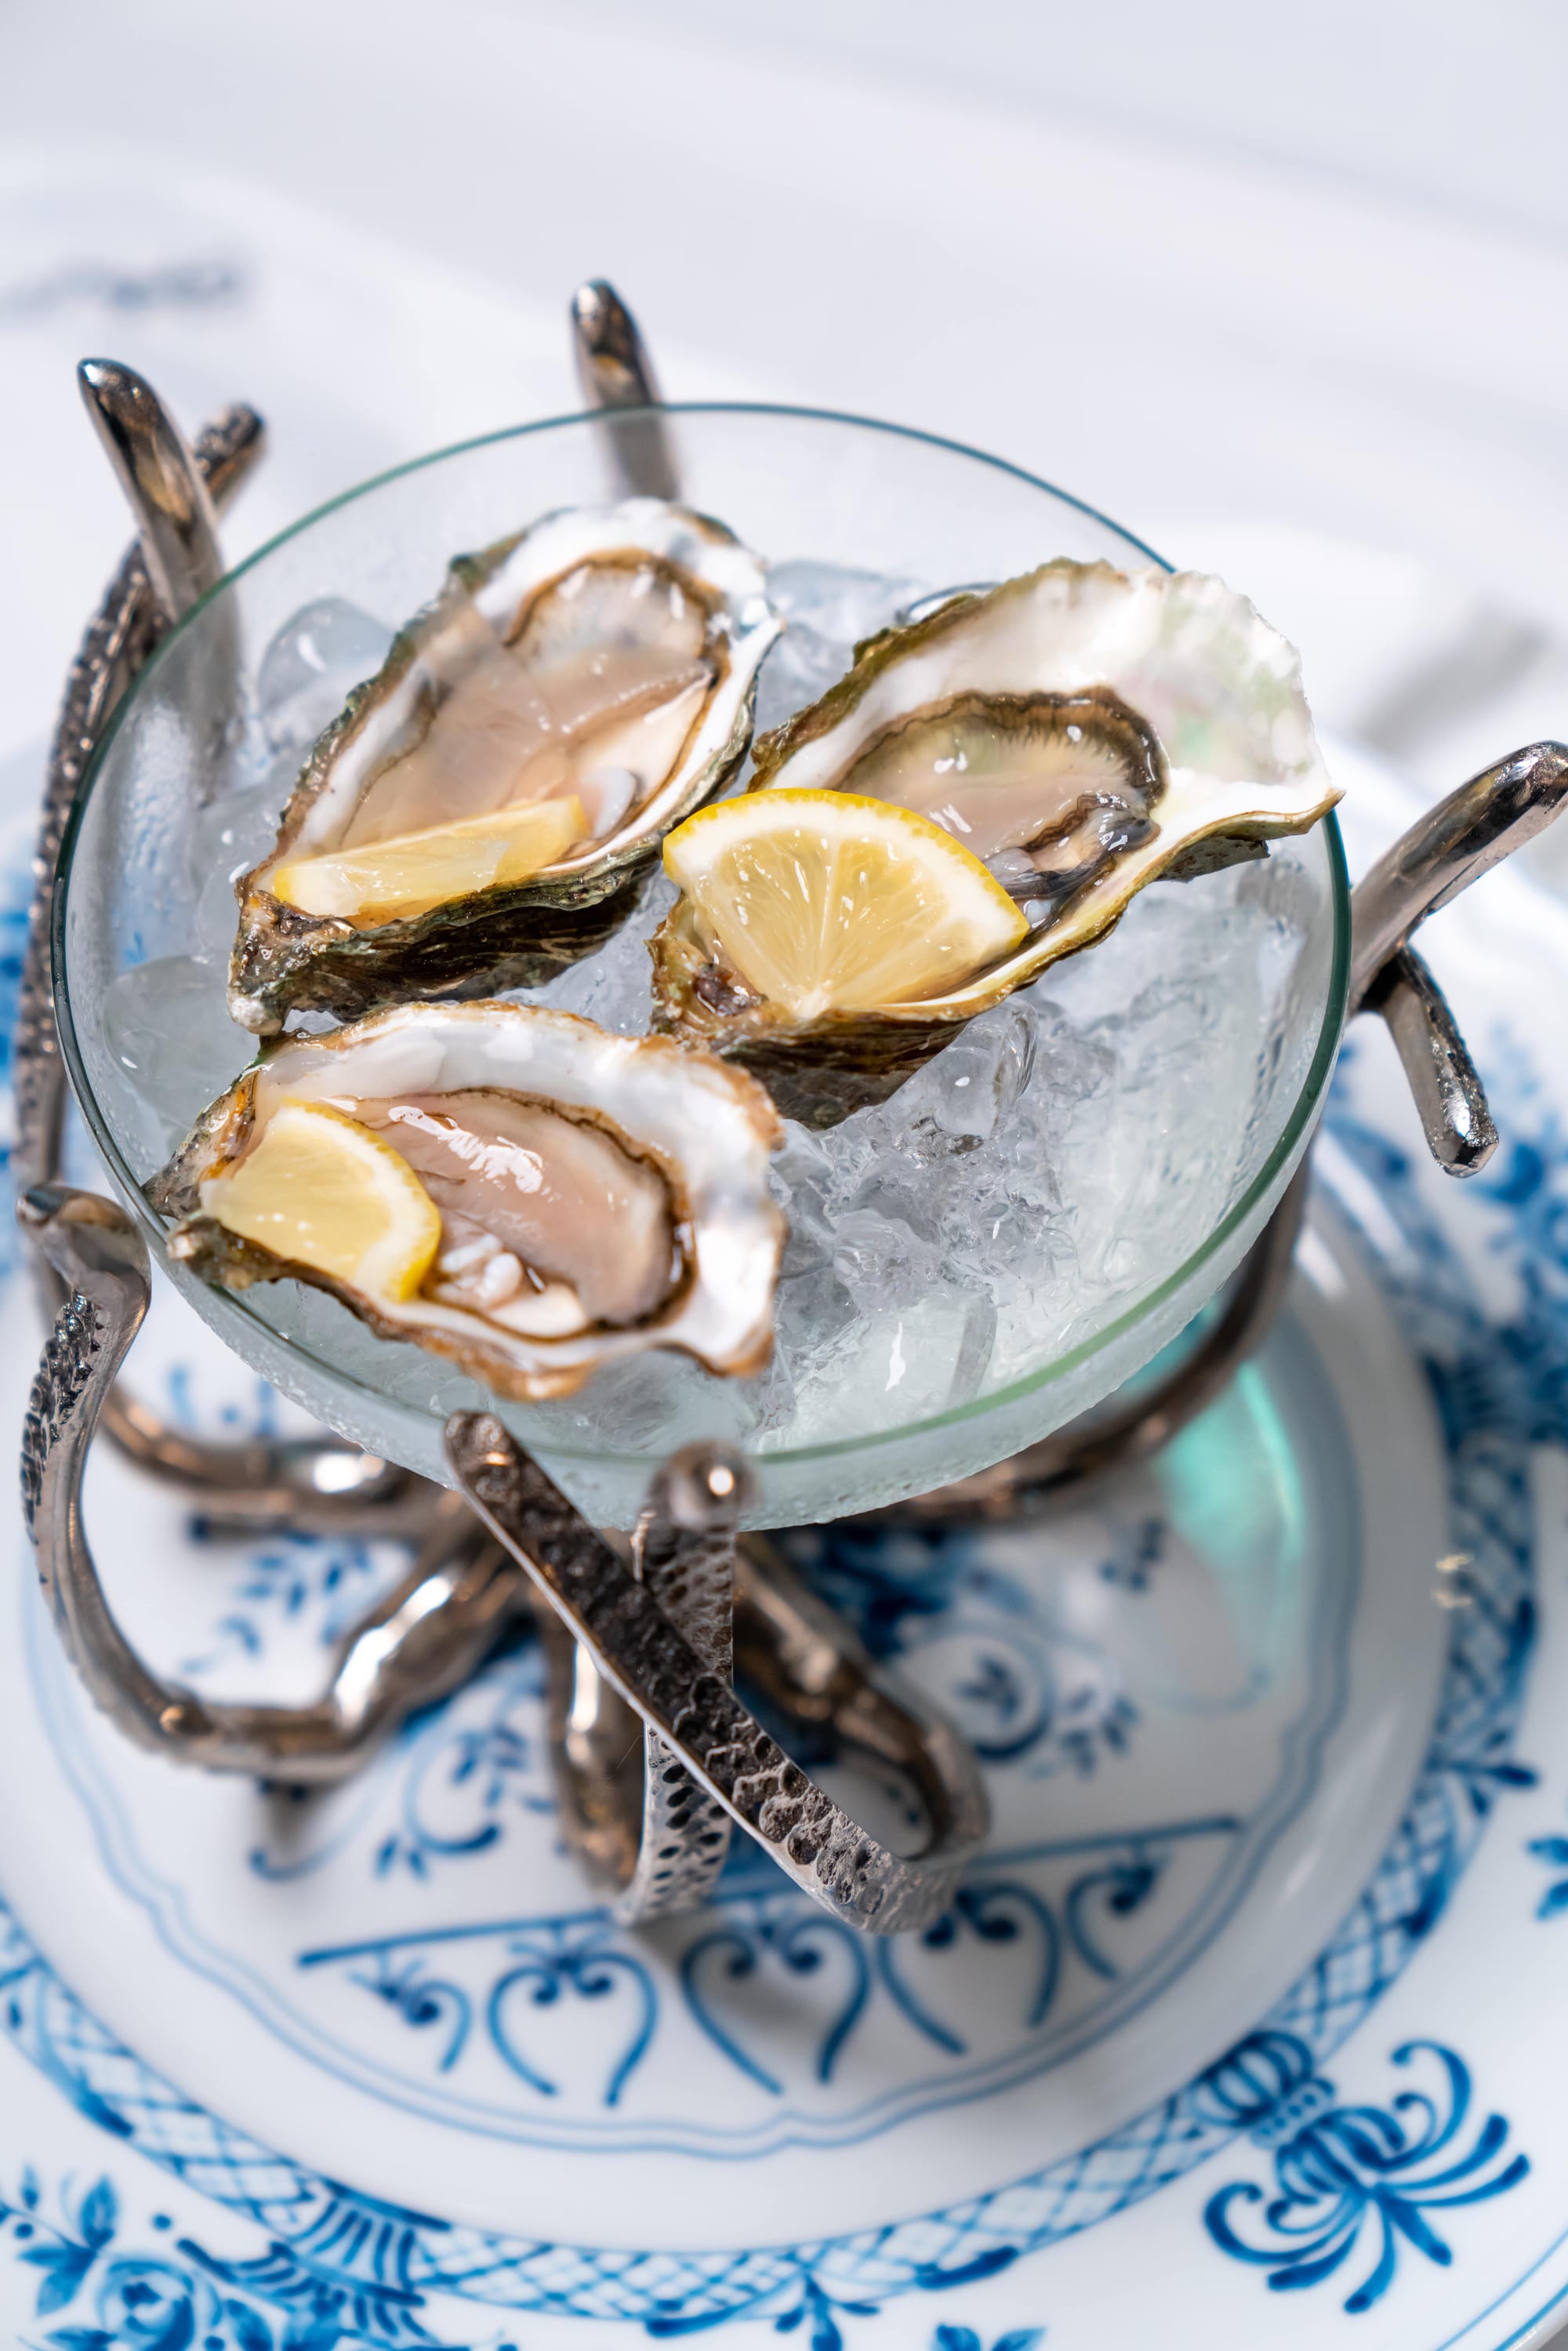 New brunch and oyster nights at Casa Sophia Loren